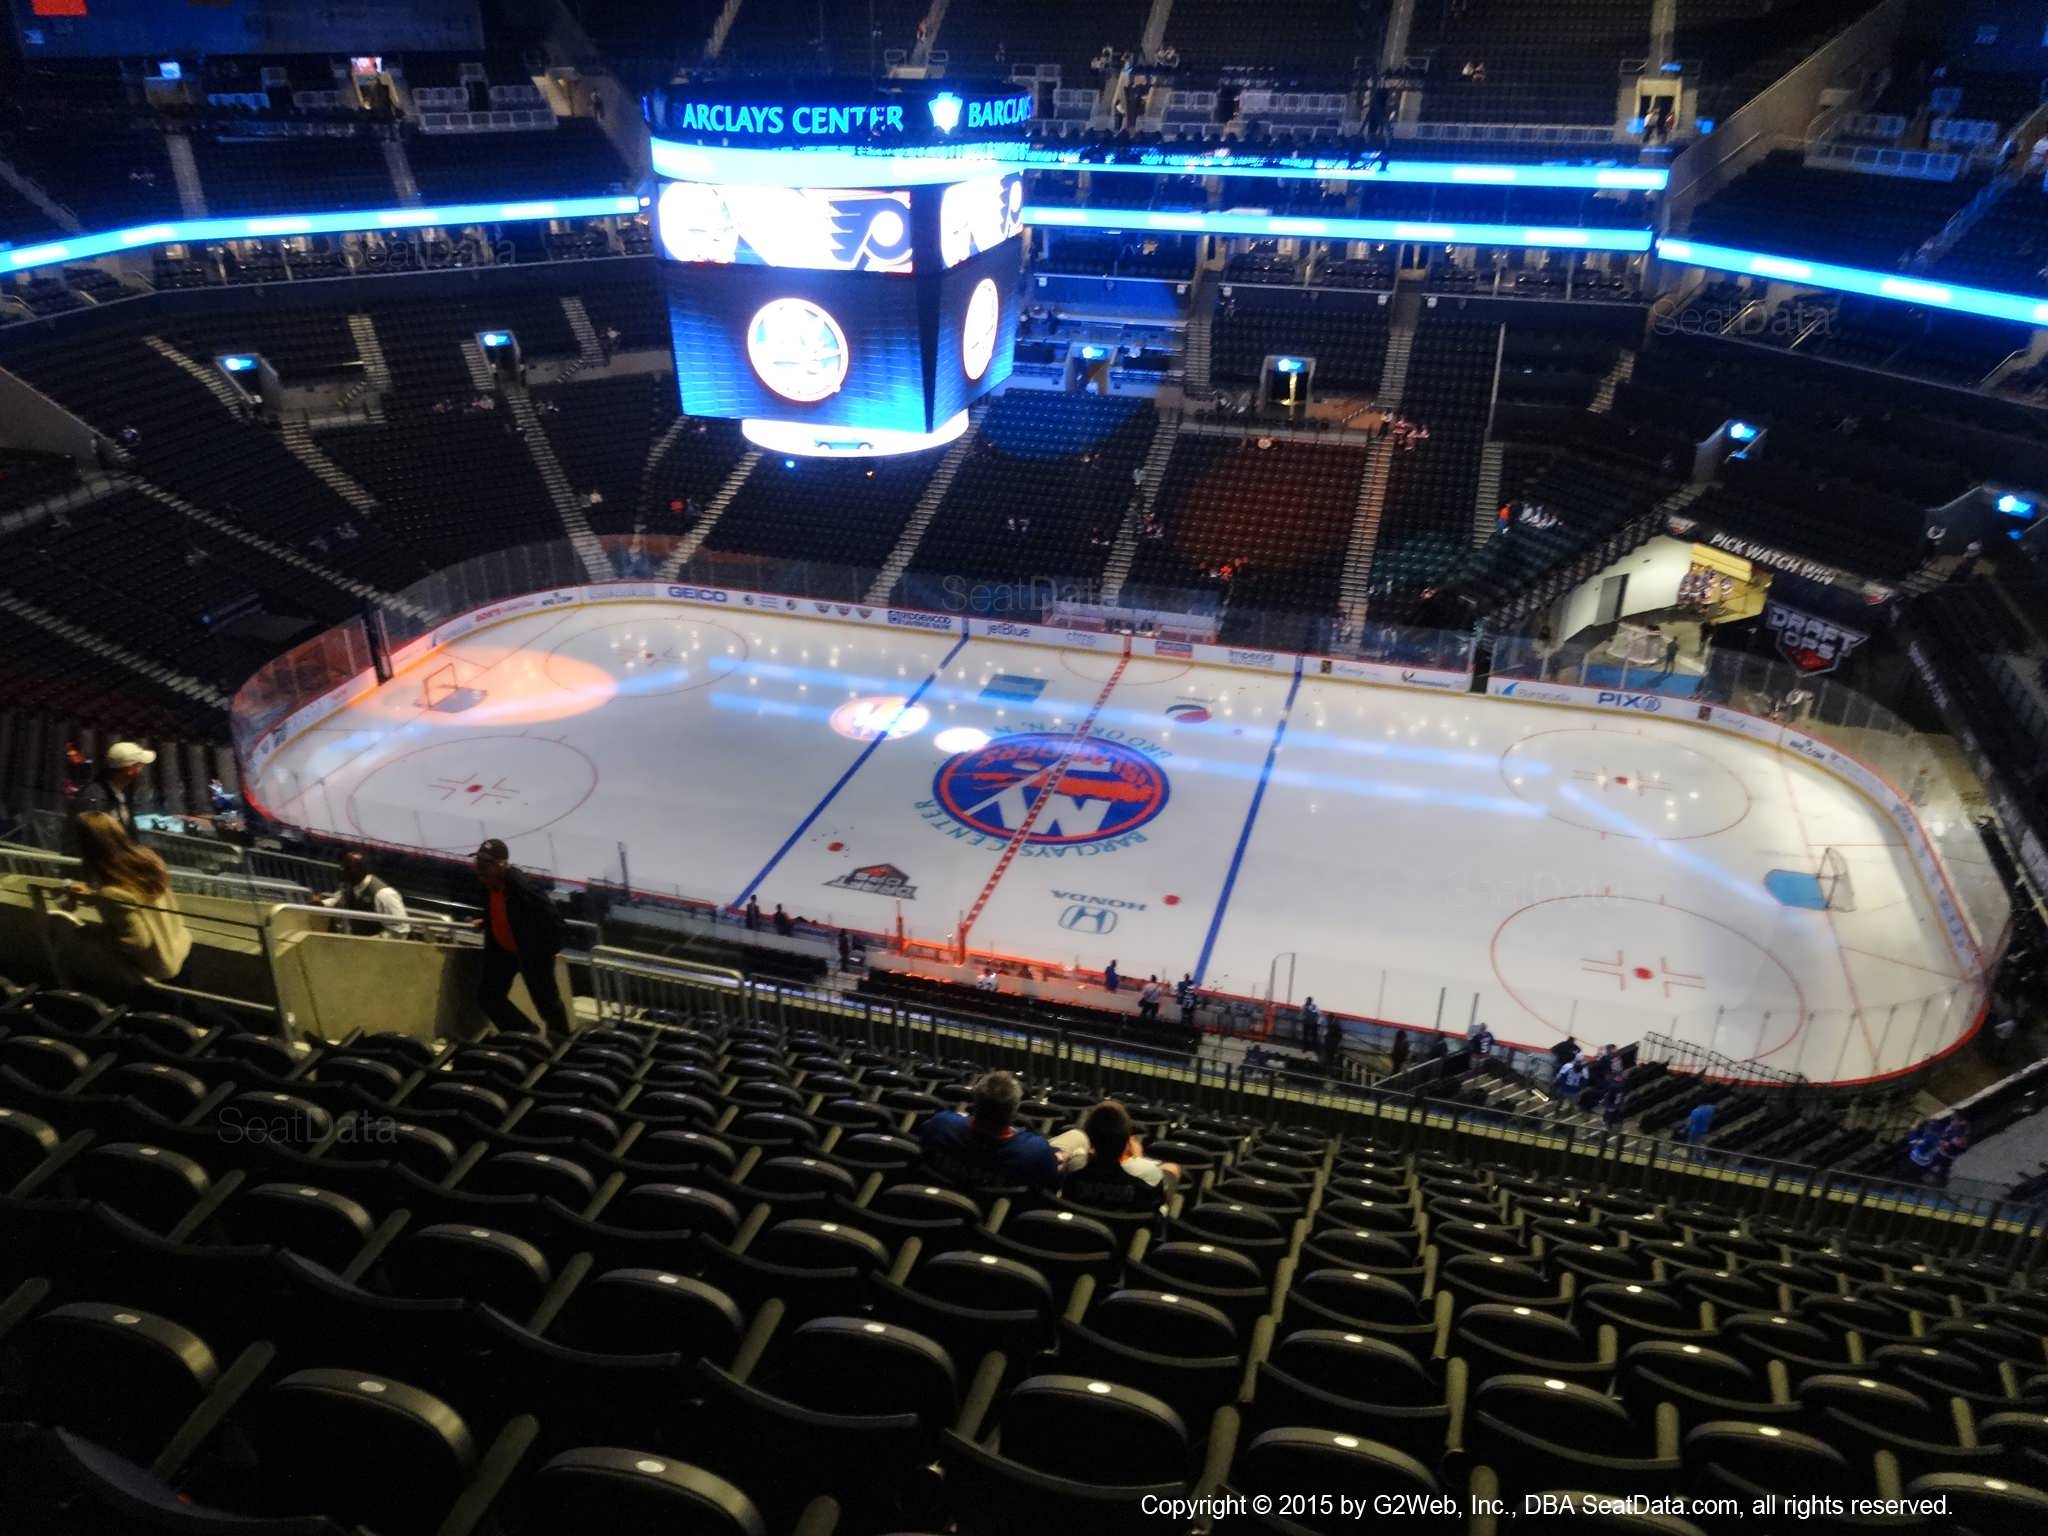 Seat View from Section 206 at the Barclays Center, home of the New York Islanders